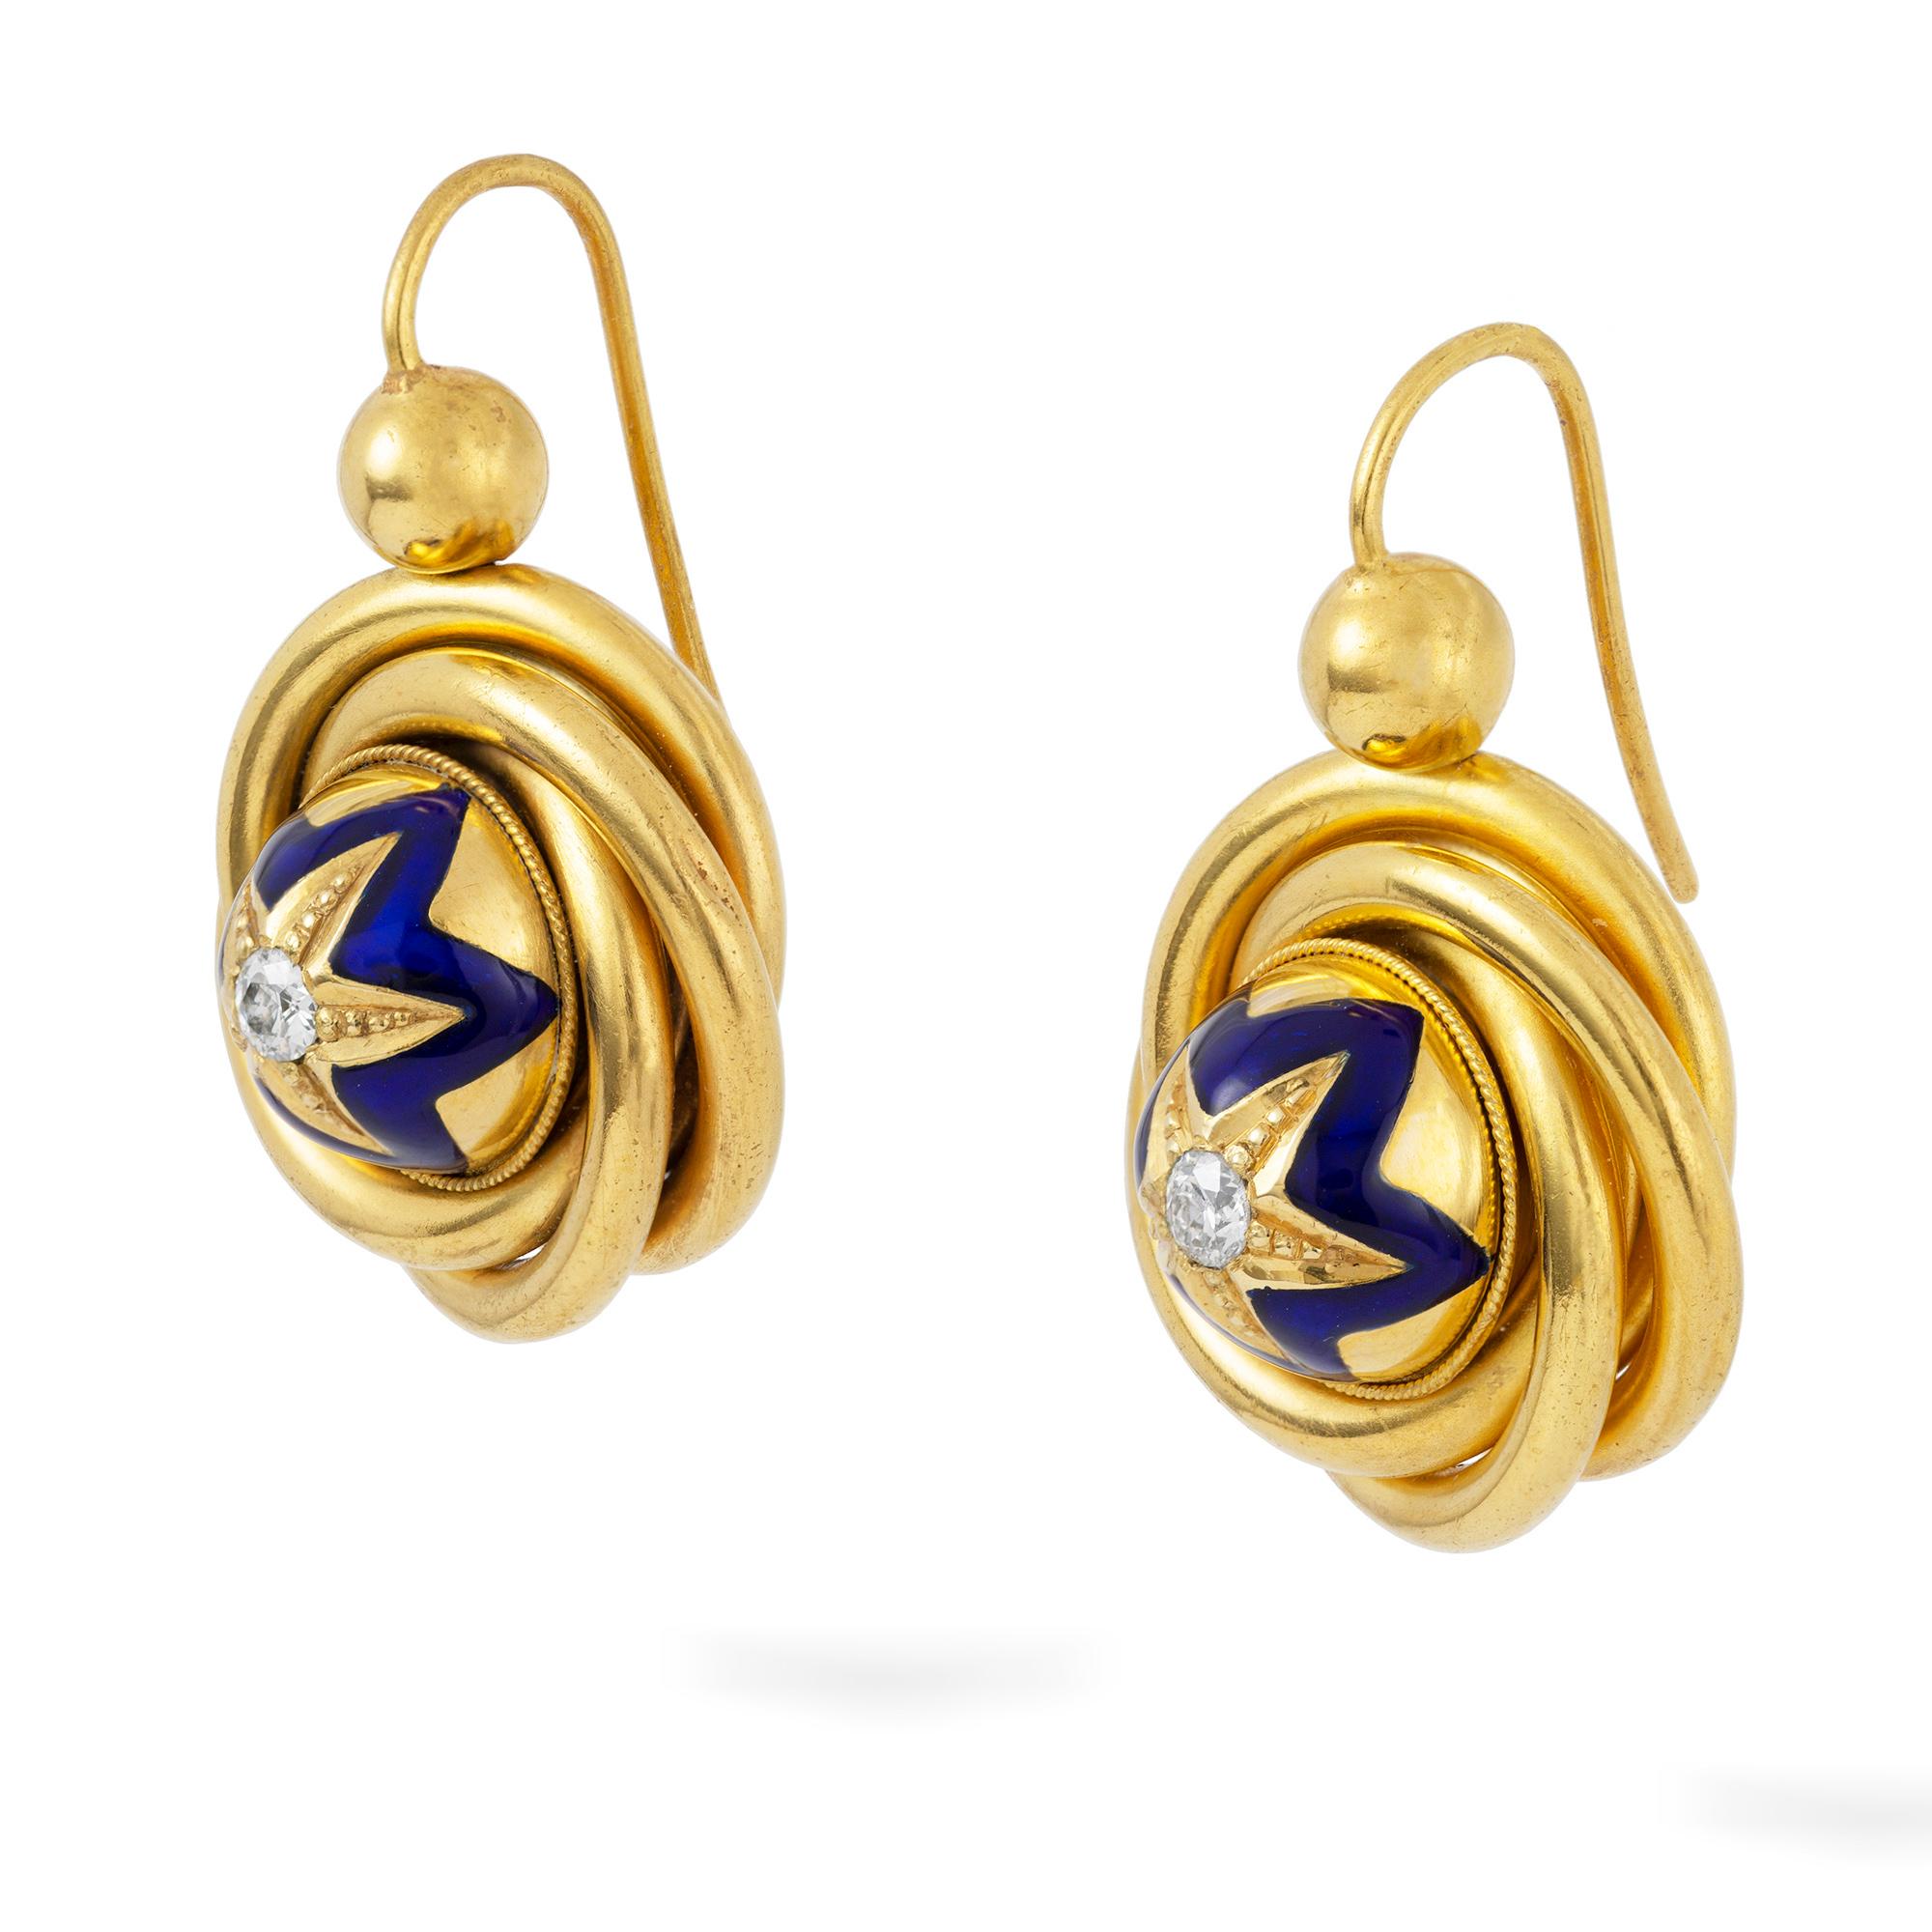 A pair of Victorian gold, diamond and enamel drop earrings, each earring set with an old cut diamond to the centre of a gold and blue enamelled star, surrounded by gold frame and suspended  by gold hook fittings, the diamonds estimated to weigh a